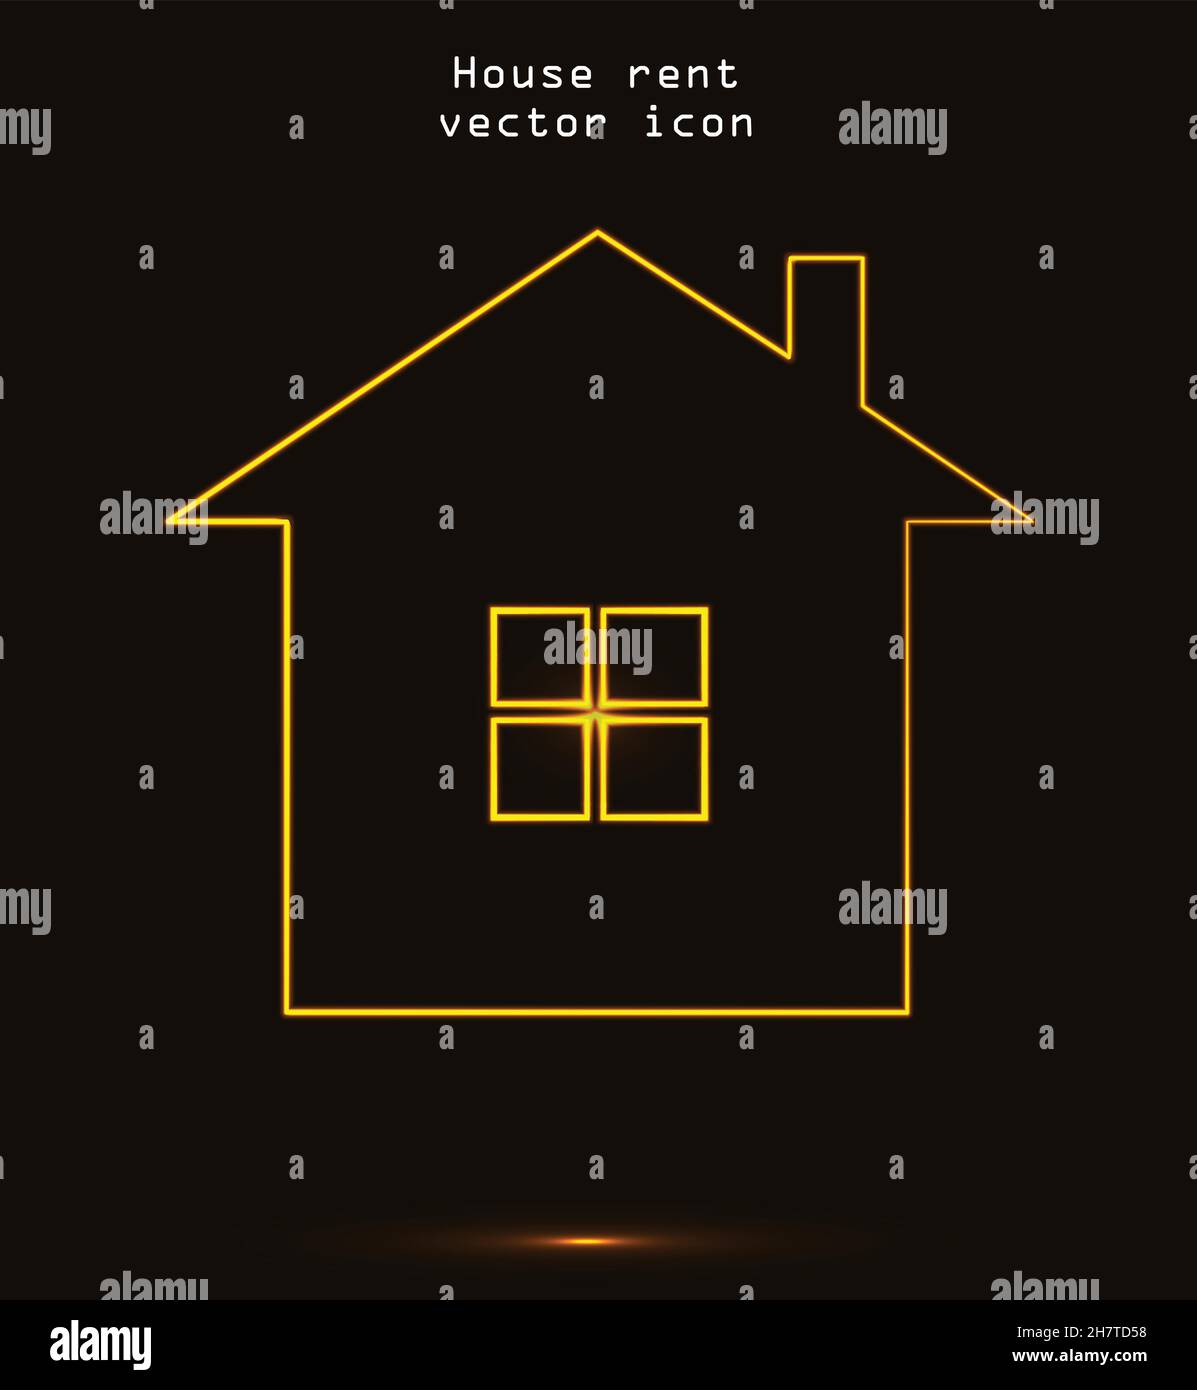 https://c8.alamy.com/comp/2H7TD58/house-to-rent-vector-icon-isolated-over-black-background-house-rent-or-house-for-sale-real-estate-glowing-icon-illustration-2H7TD58.jpg